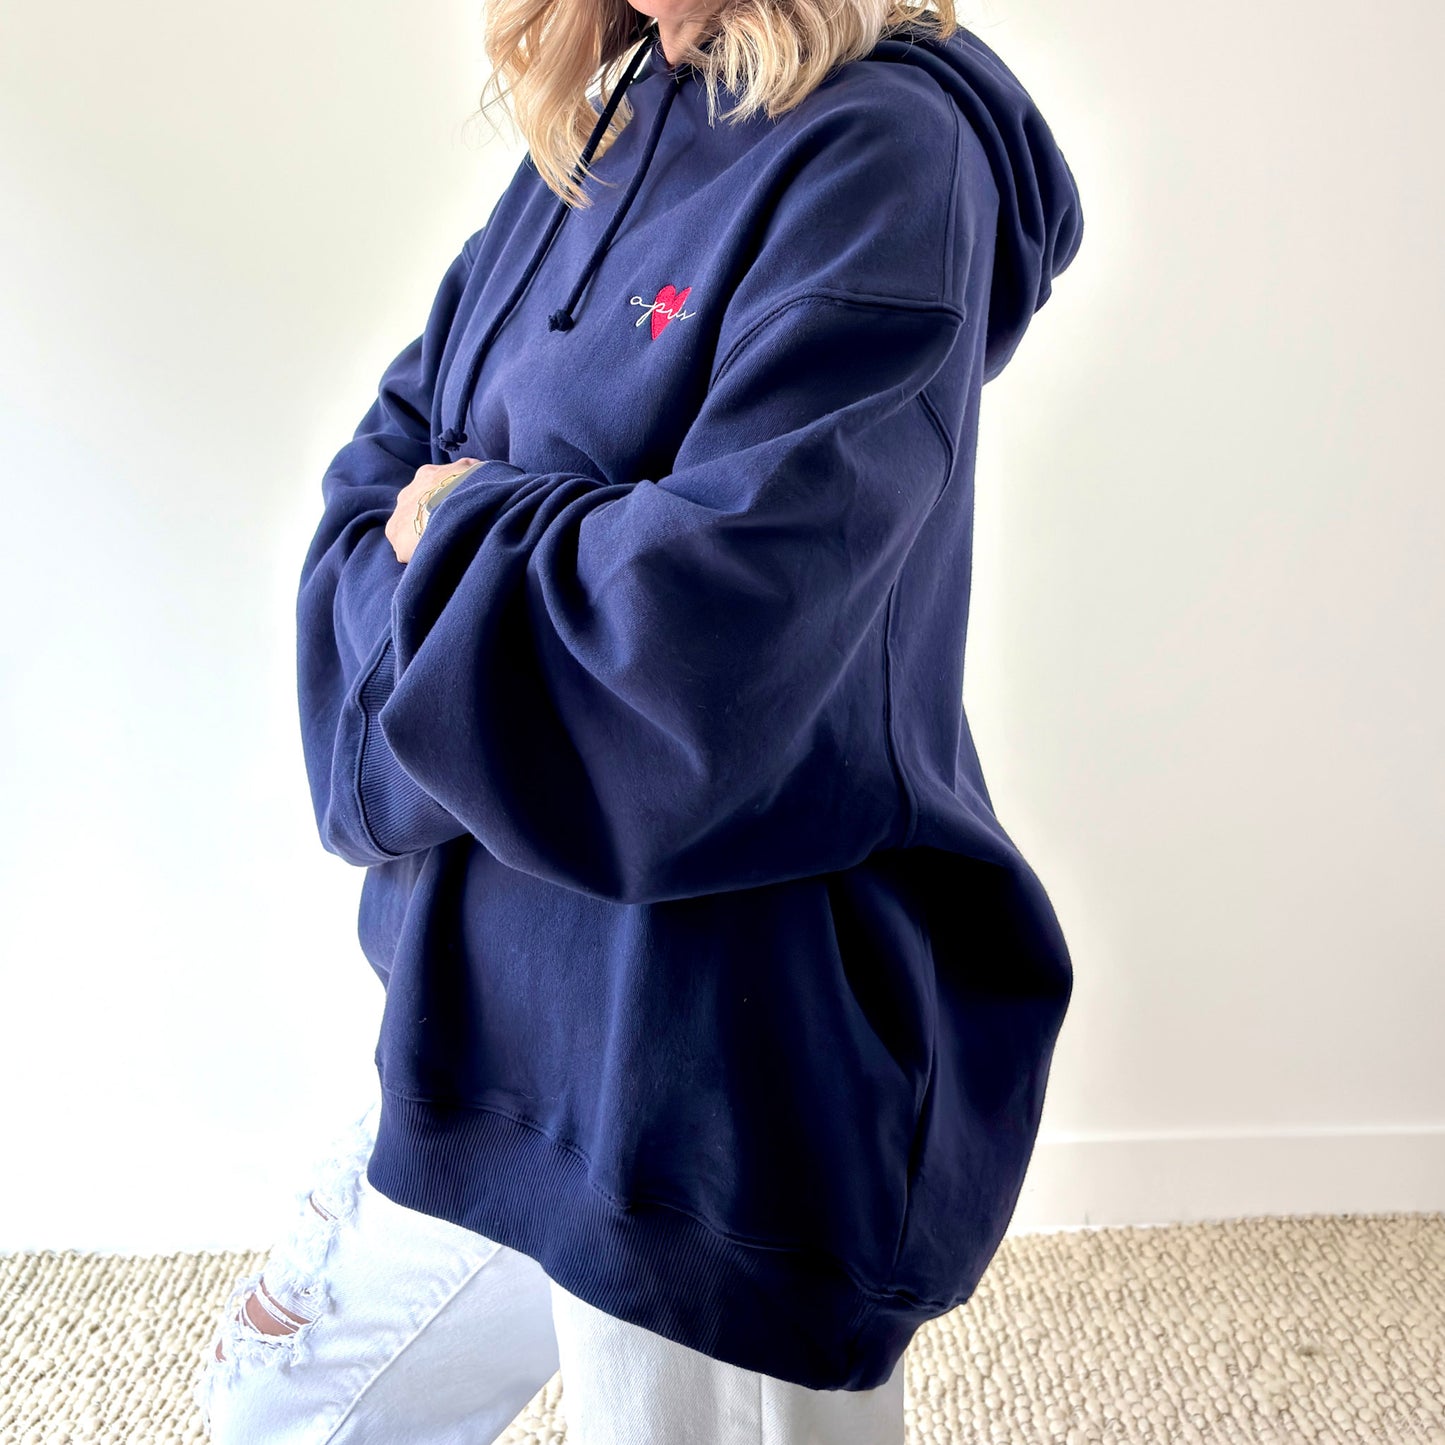 Women's navy pullover hooded oversized light weight fleece sweatshirt with script après and heart embroidery